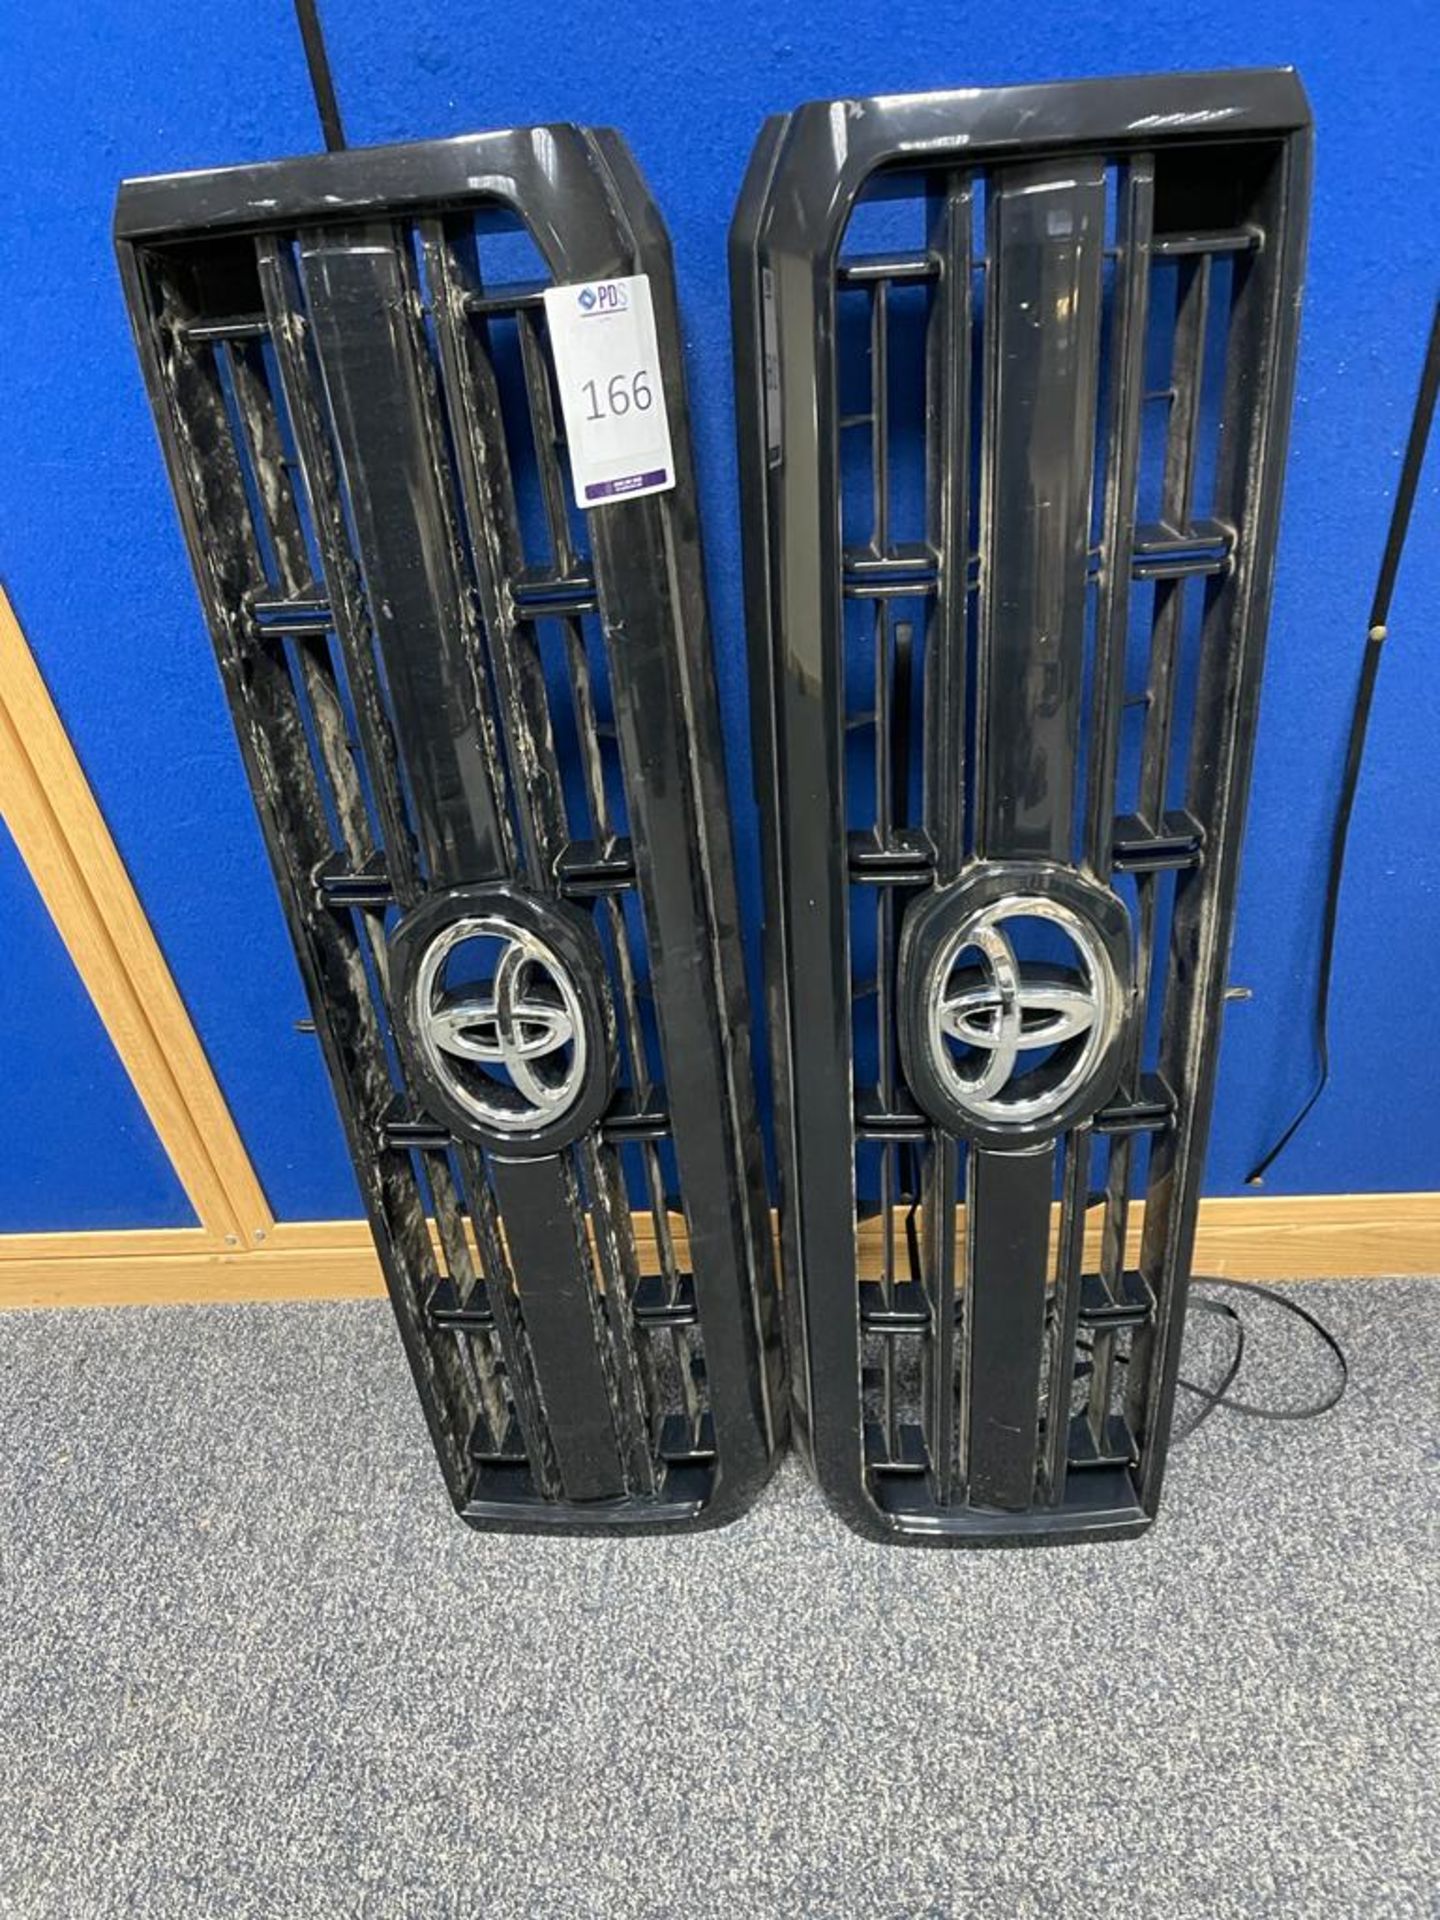 Two Toyota Landcruiser Front Grills (Location Dover. Please Refer to General Notes)